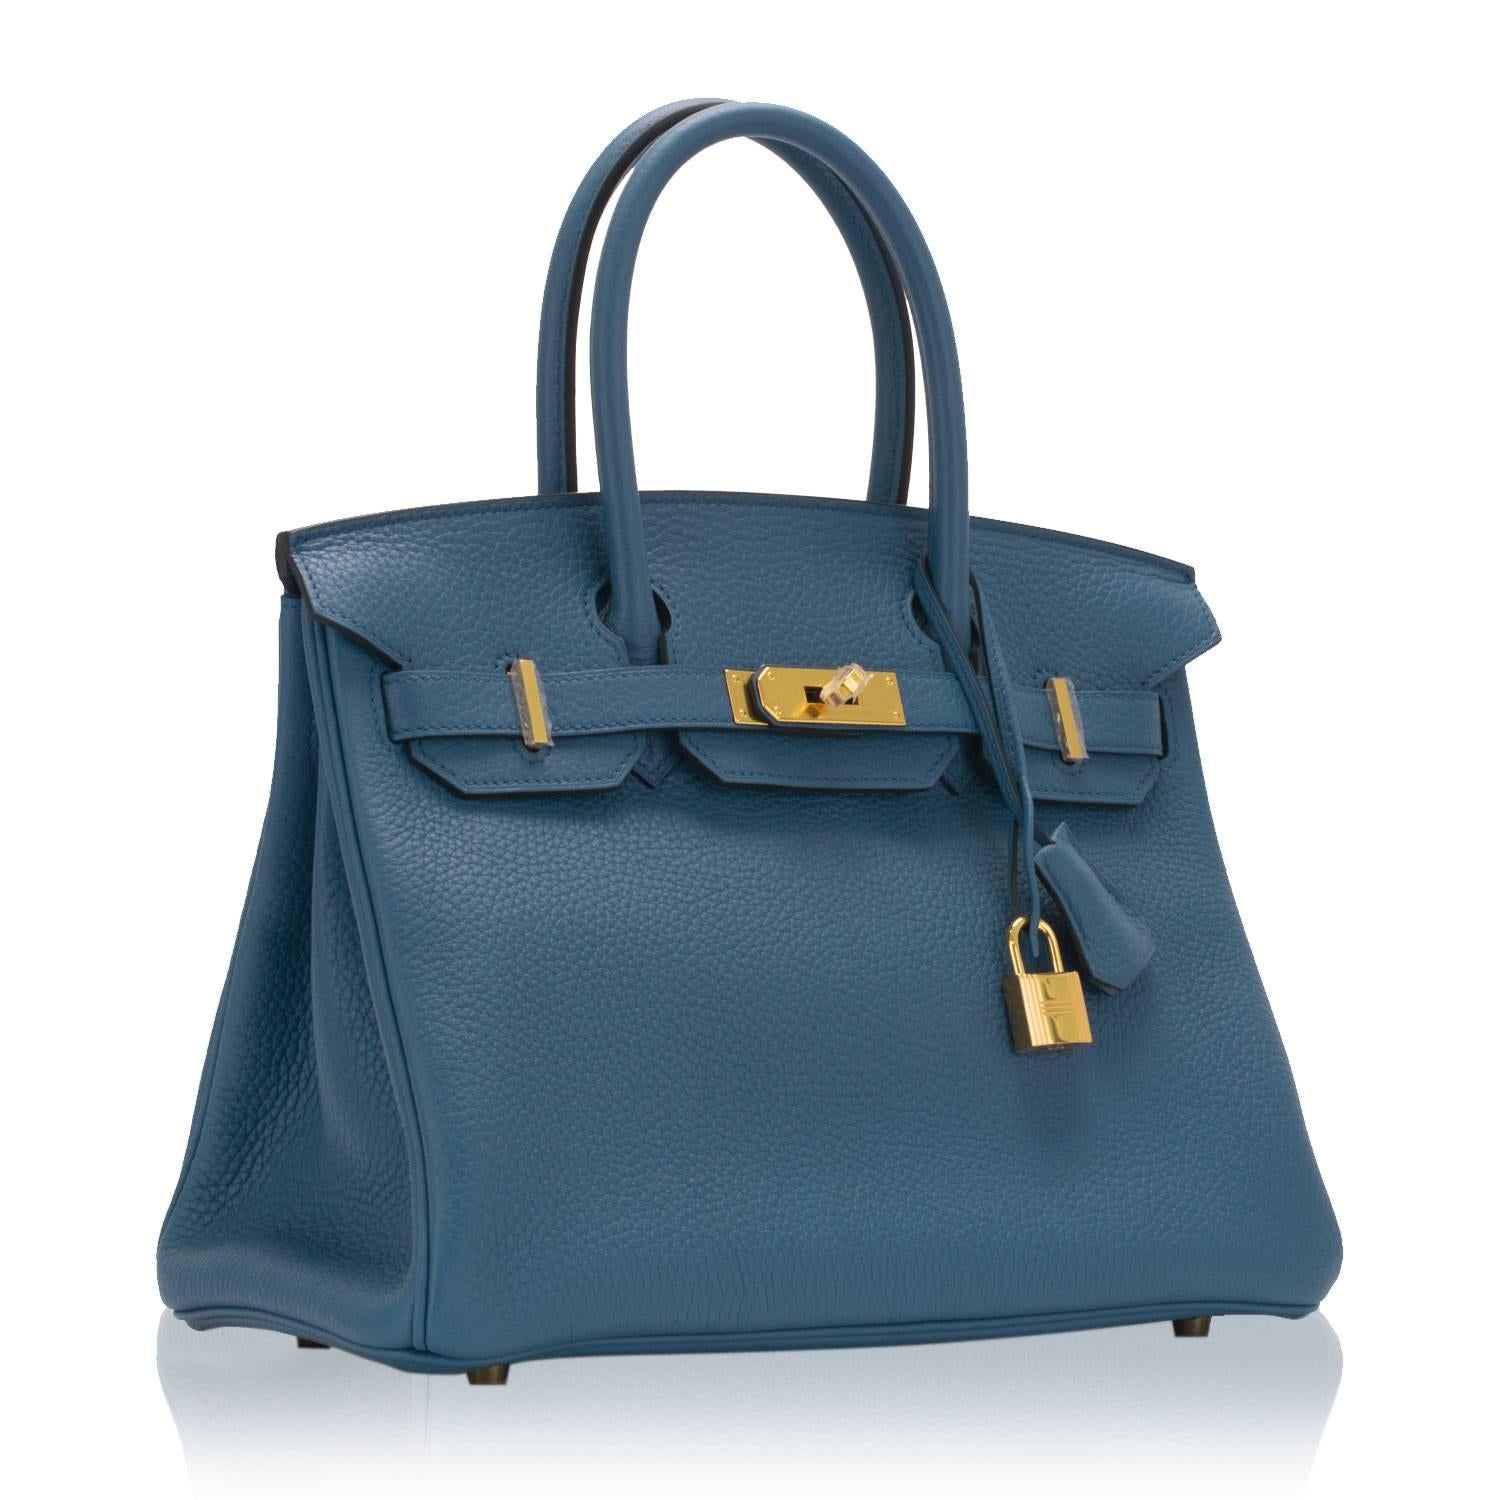 Hermes Birkin 30 T. Clemence Leather R2 Blue Agate NEW COLOR Gold Hardware 2016

Bought it in Hermes store in 2016.

Pre-owned and never used

Model:  Birkin

Dimension:  30cm width x 22cm height x 16cm length.

Color: R2 Blue Agate, NEW